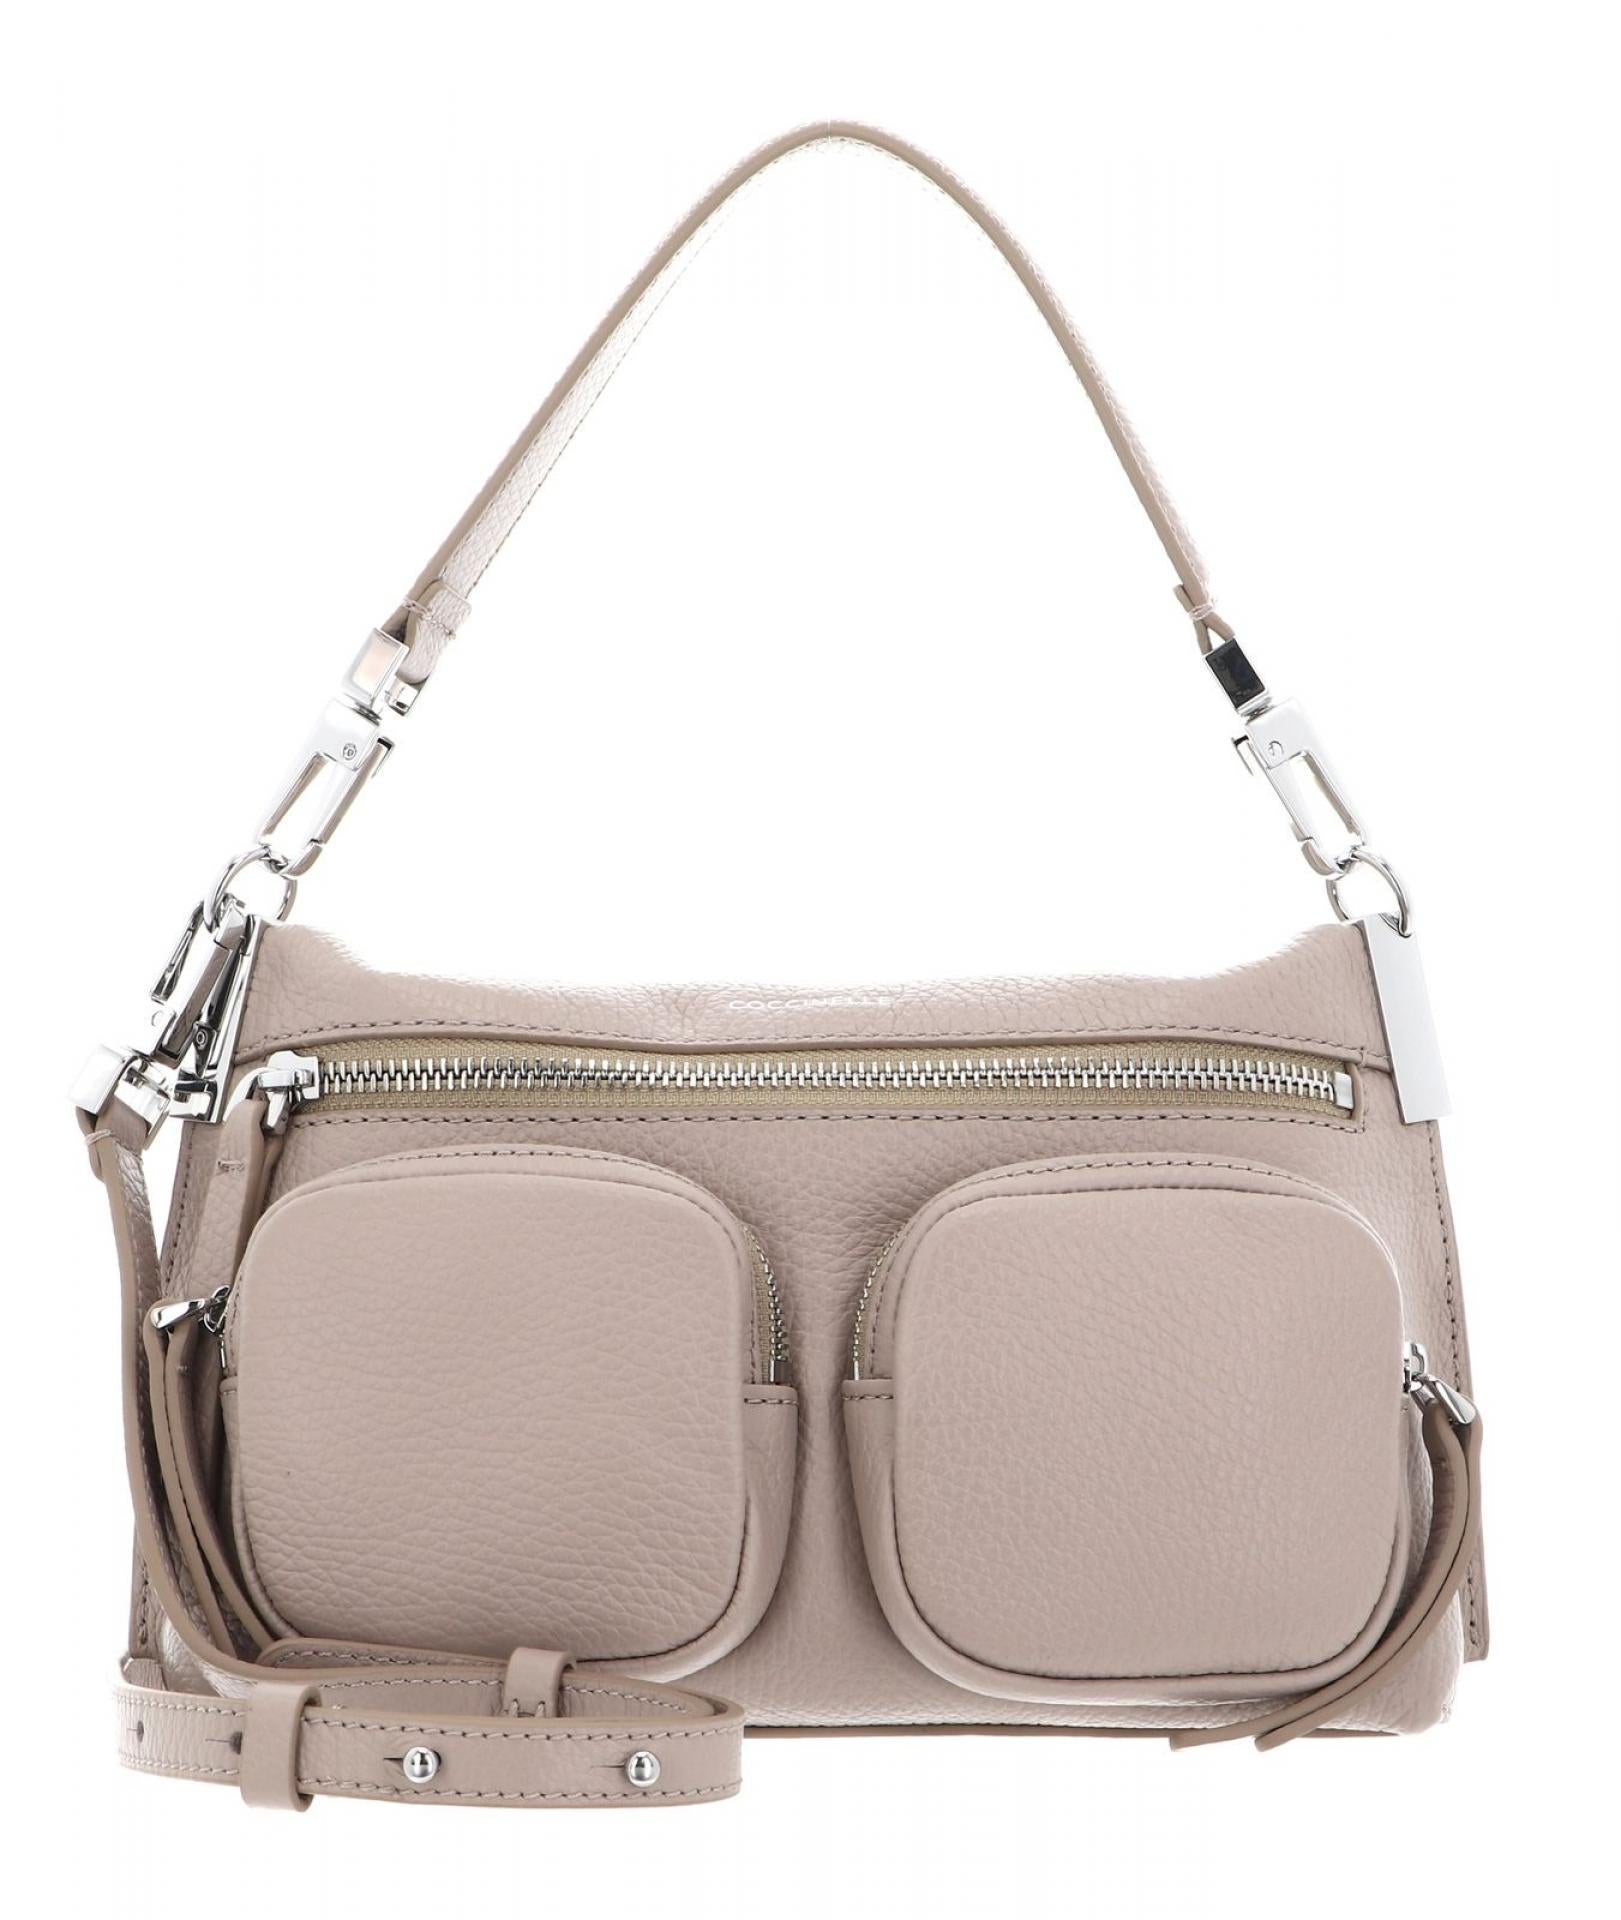 Coccinelle Hyle Crossbody HANDBAG GRAINED LEATHER - Variante: PINK